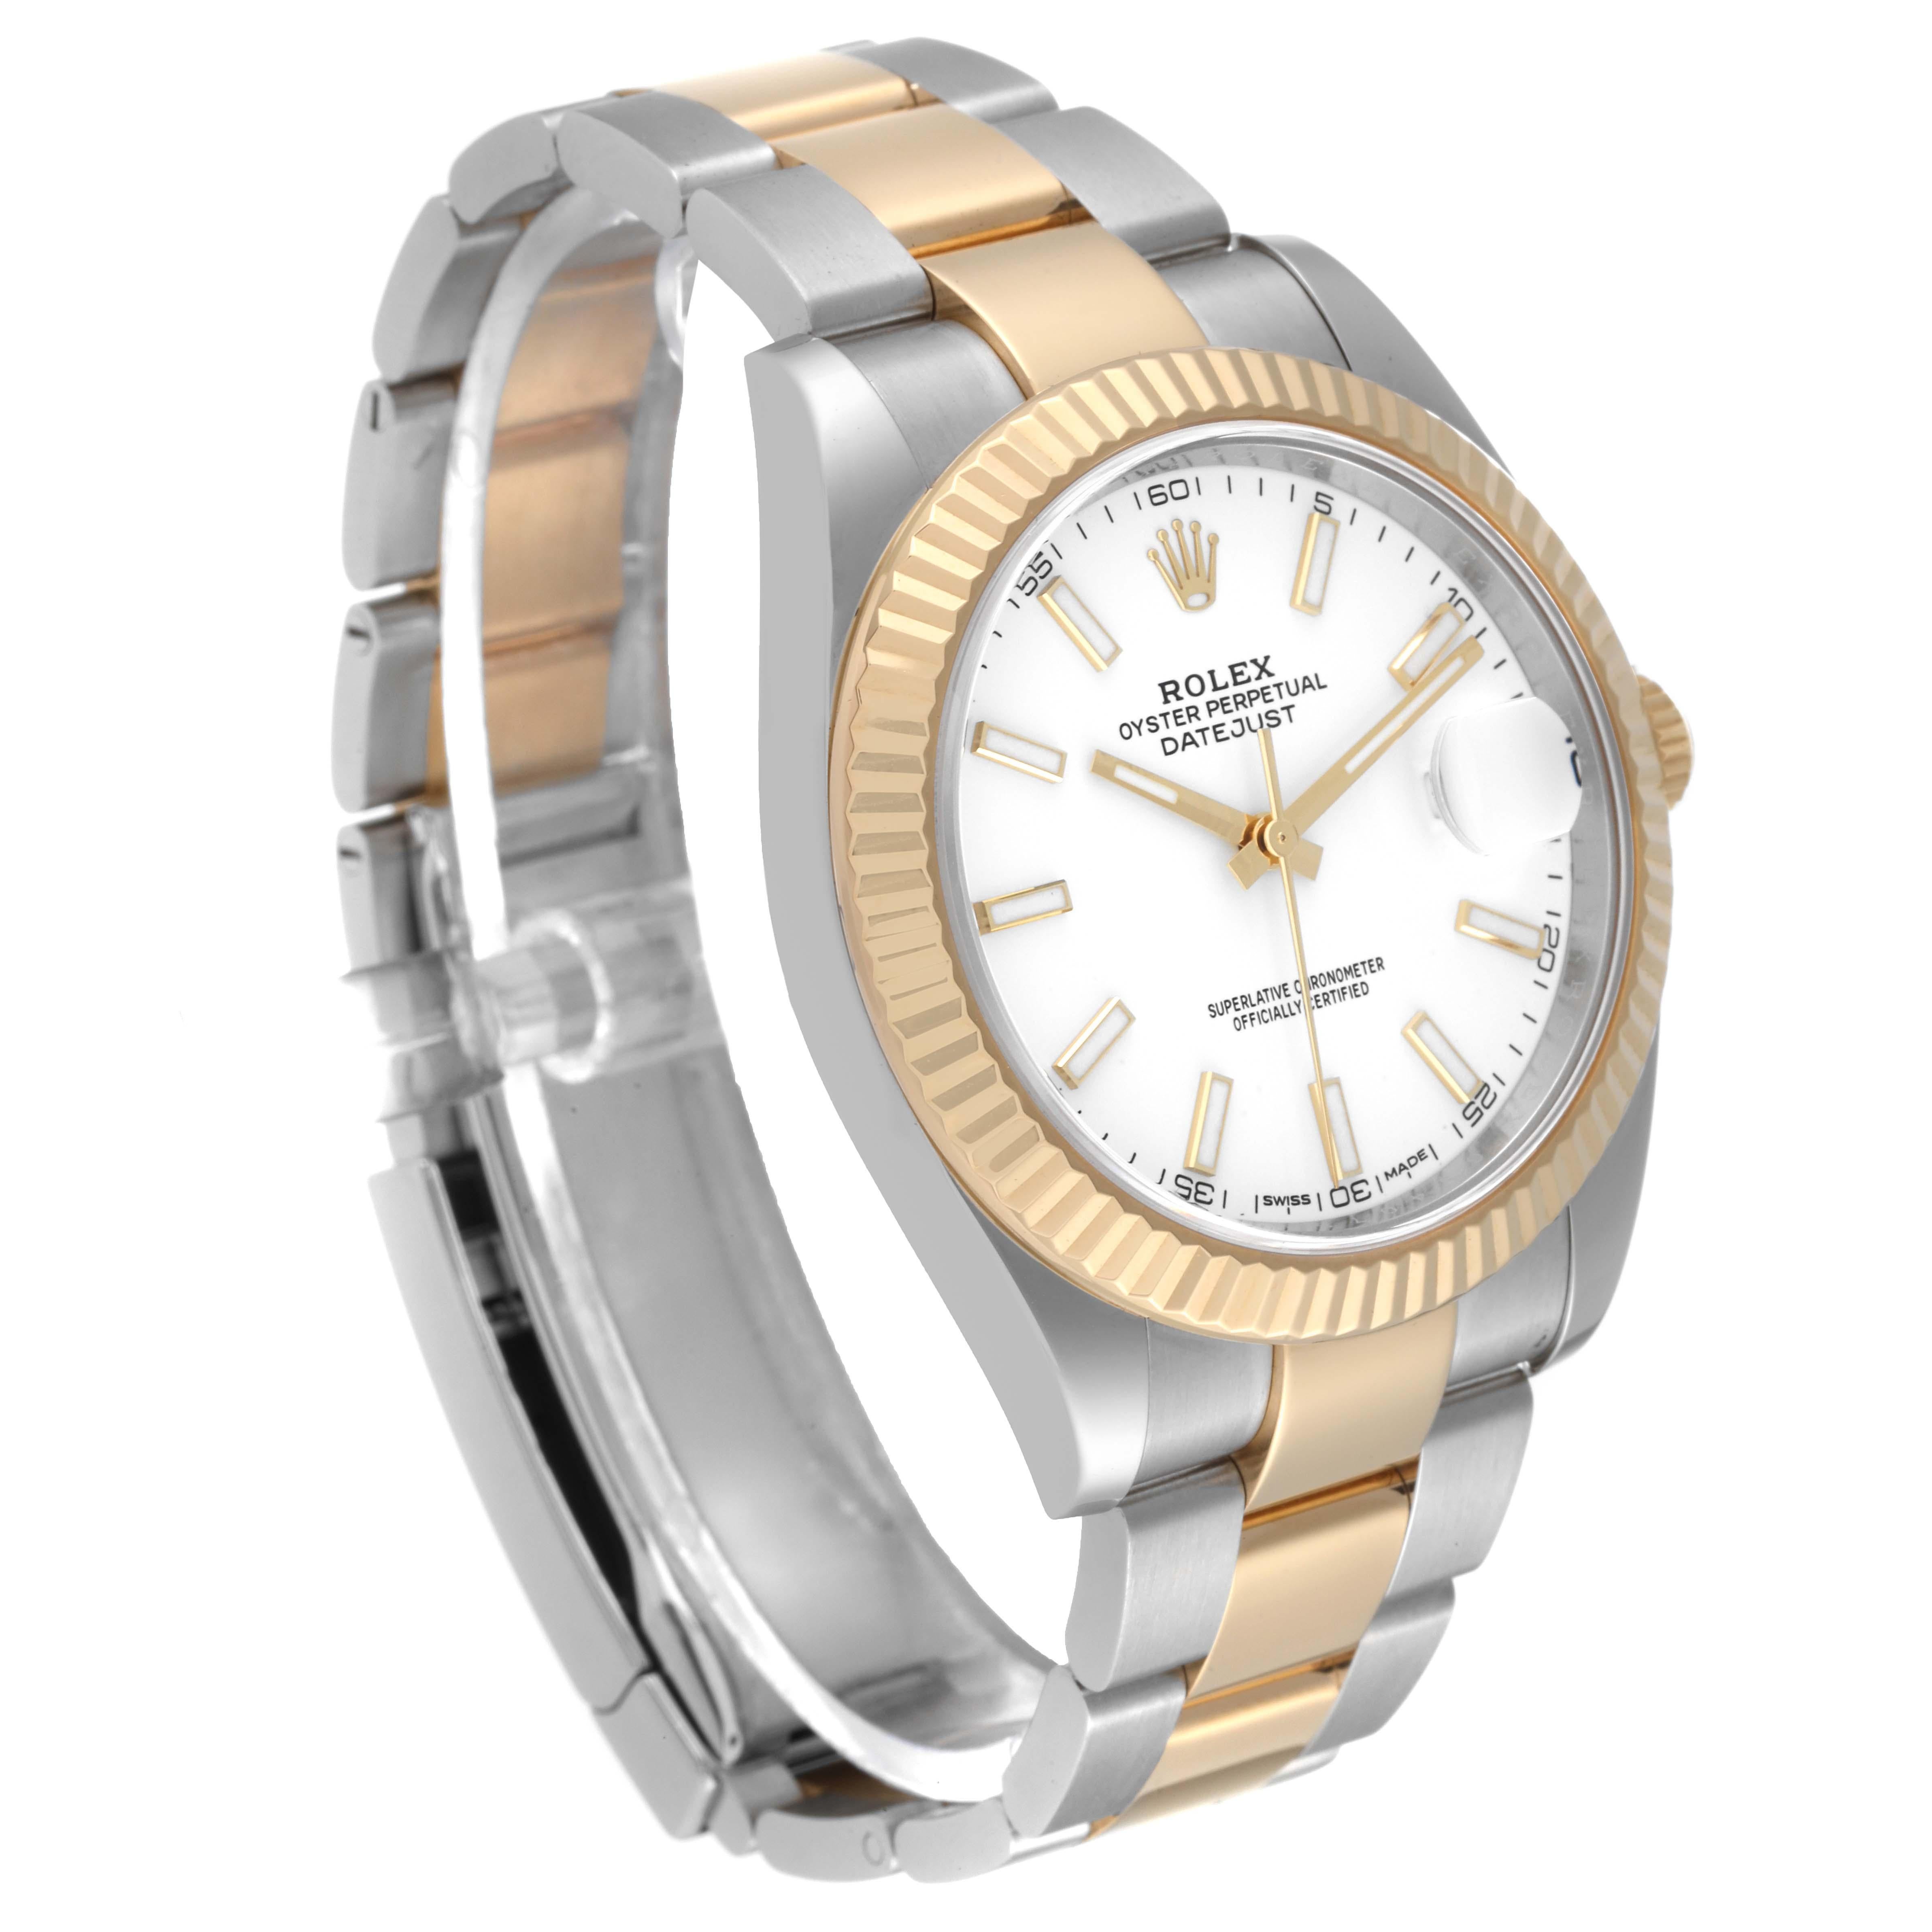 Rolex Datejust 41 Steel Yellow Gold White Dial Mens Watch 126333 Box Card In Excellent Condition For Sale In Atlanta, GA